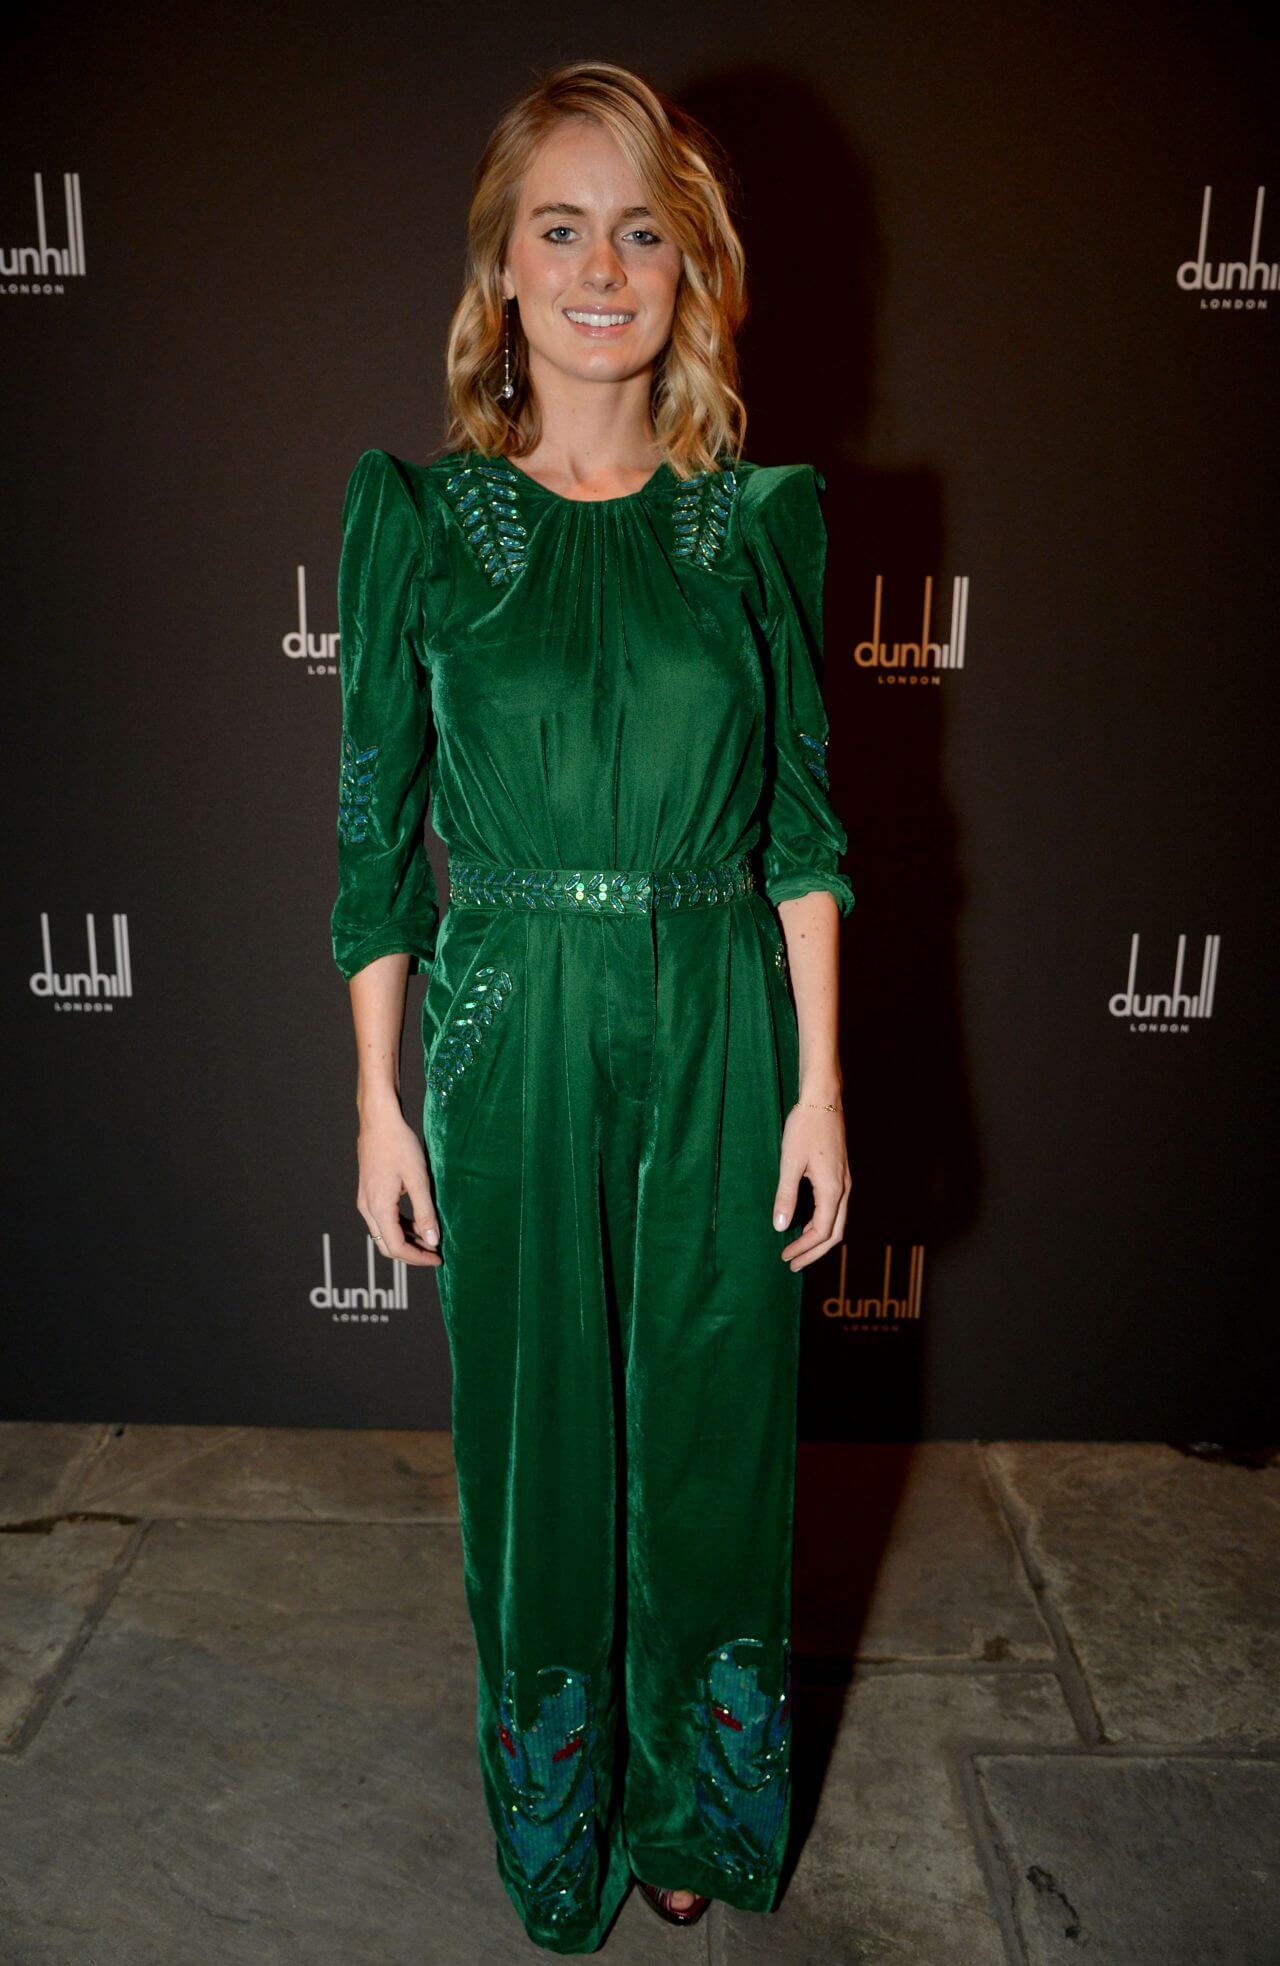 Cressida Bonas  In Bottle Green Puffed Sleeves Jumpsuit At Dunhill & GQ Pre-BAFTA Filmmakers Dinner And Party in London